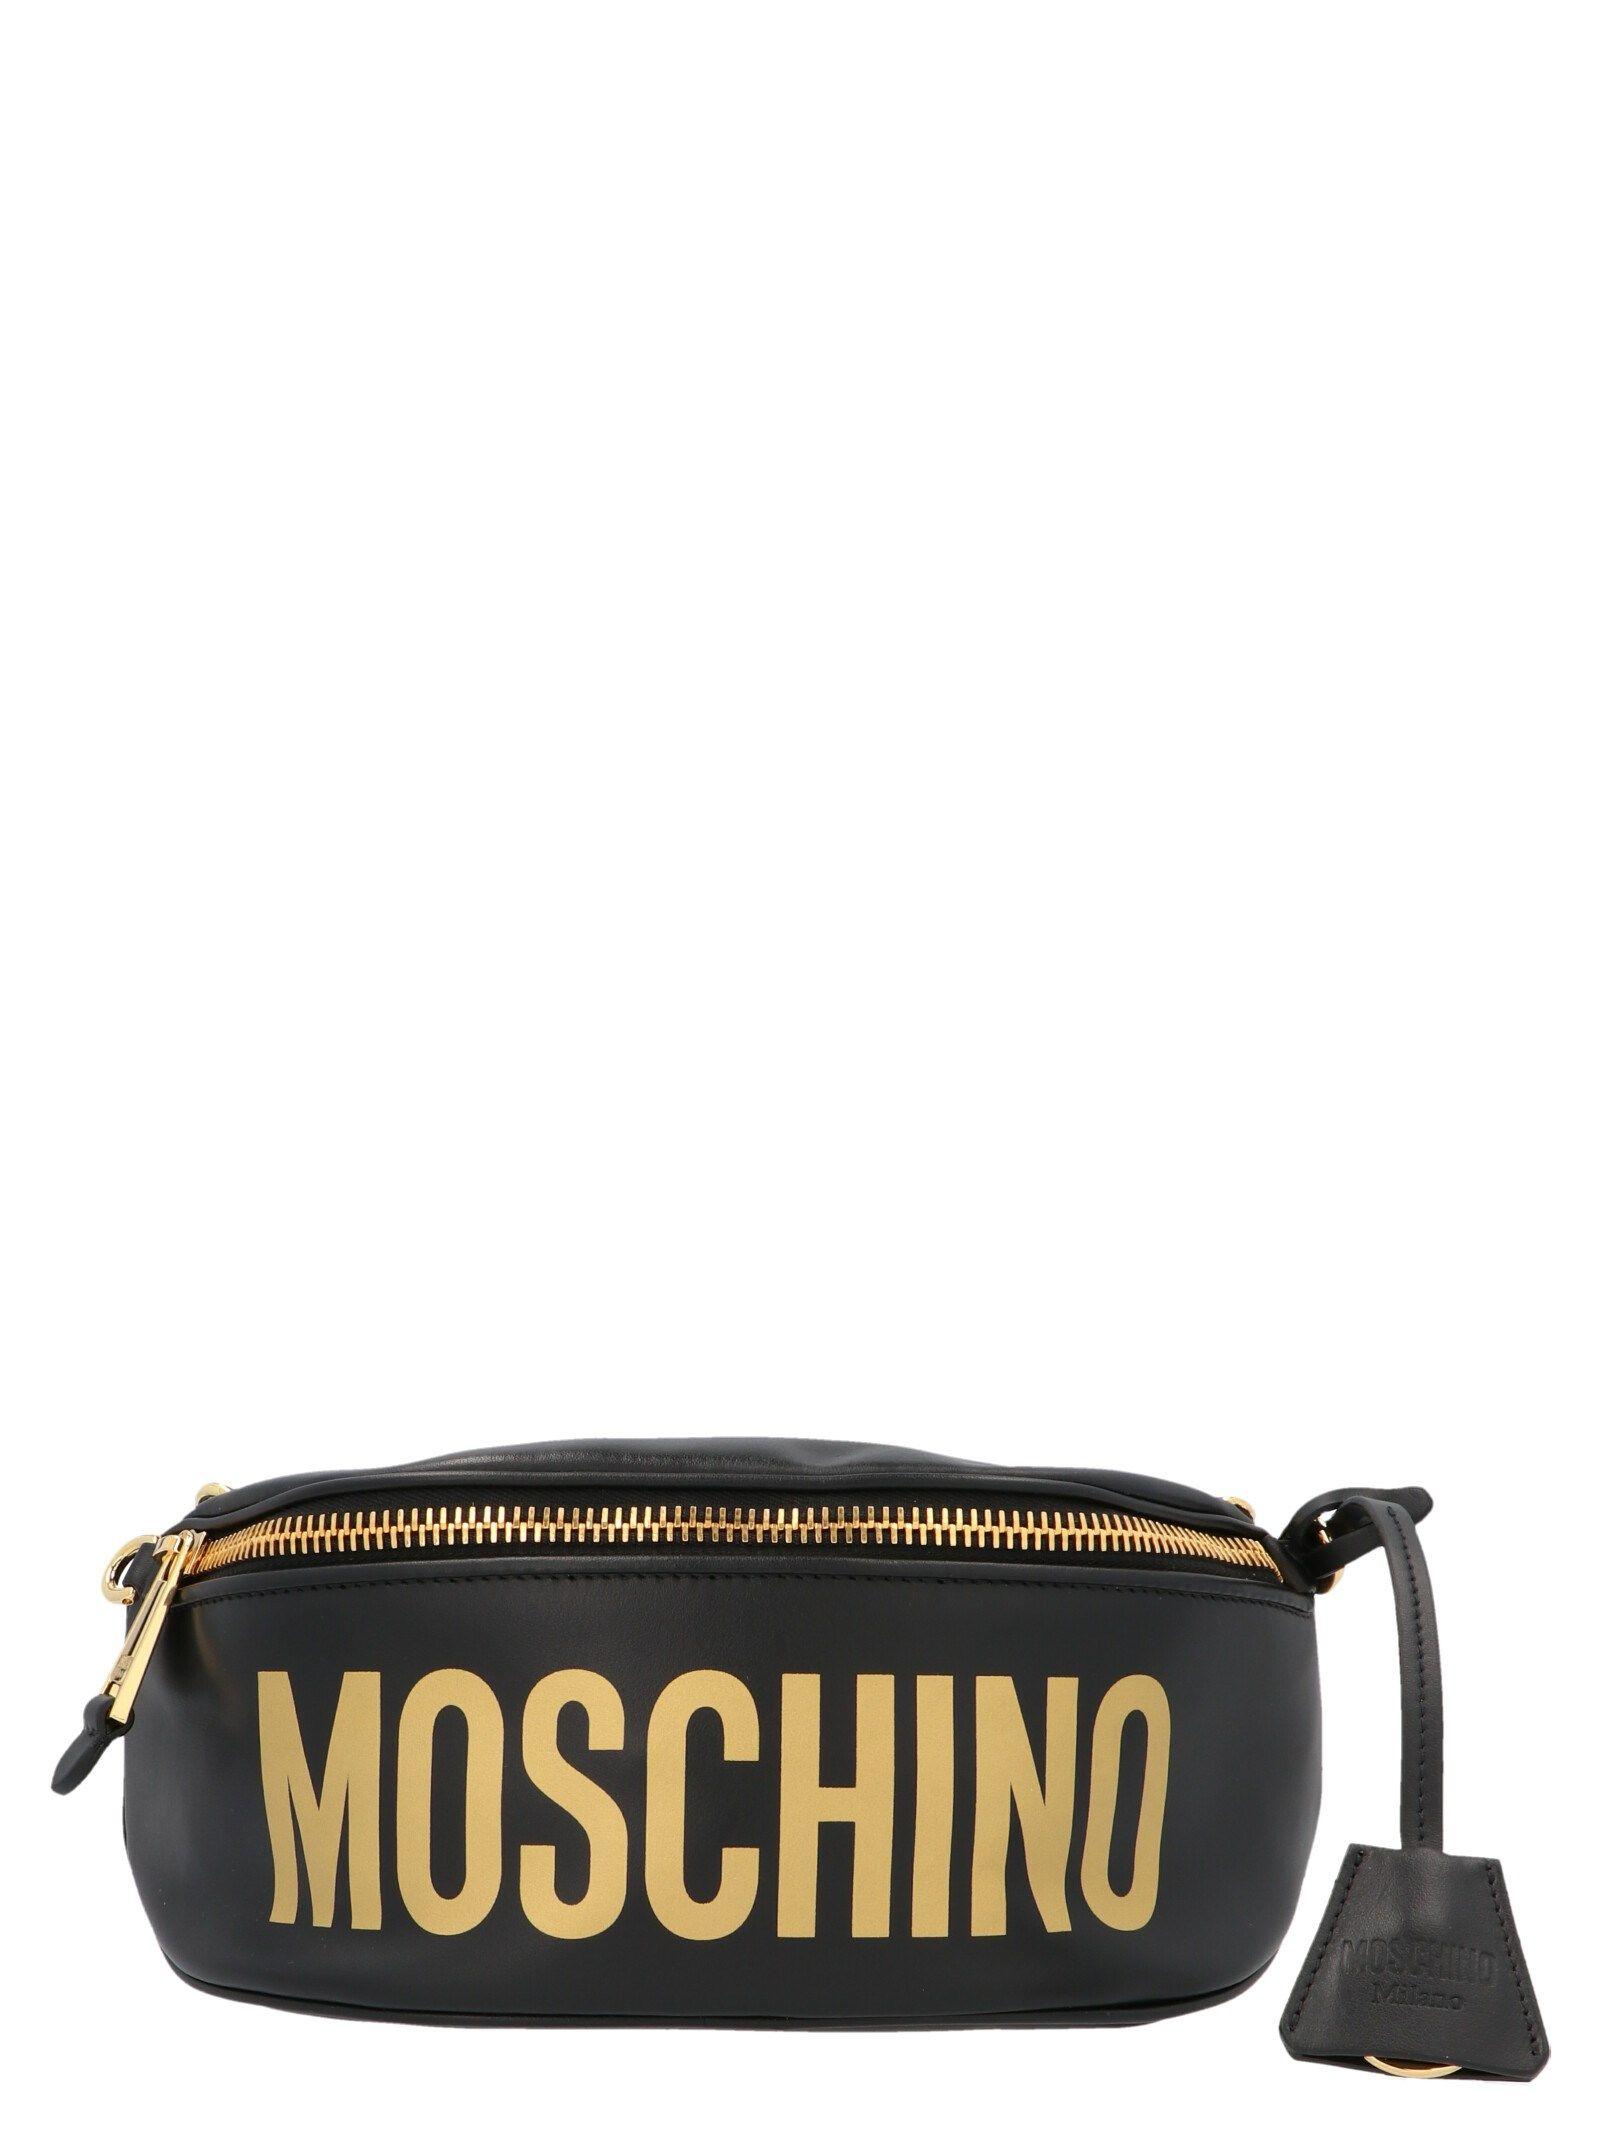 Moschino Leather Belt Bag in Black - Lyst